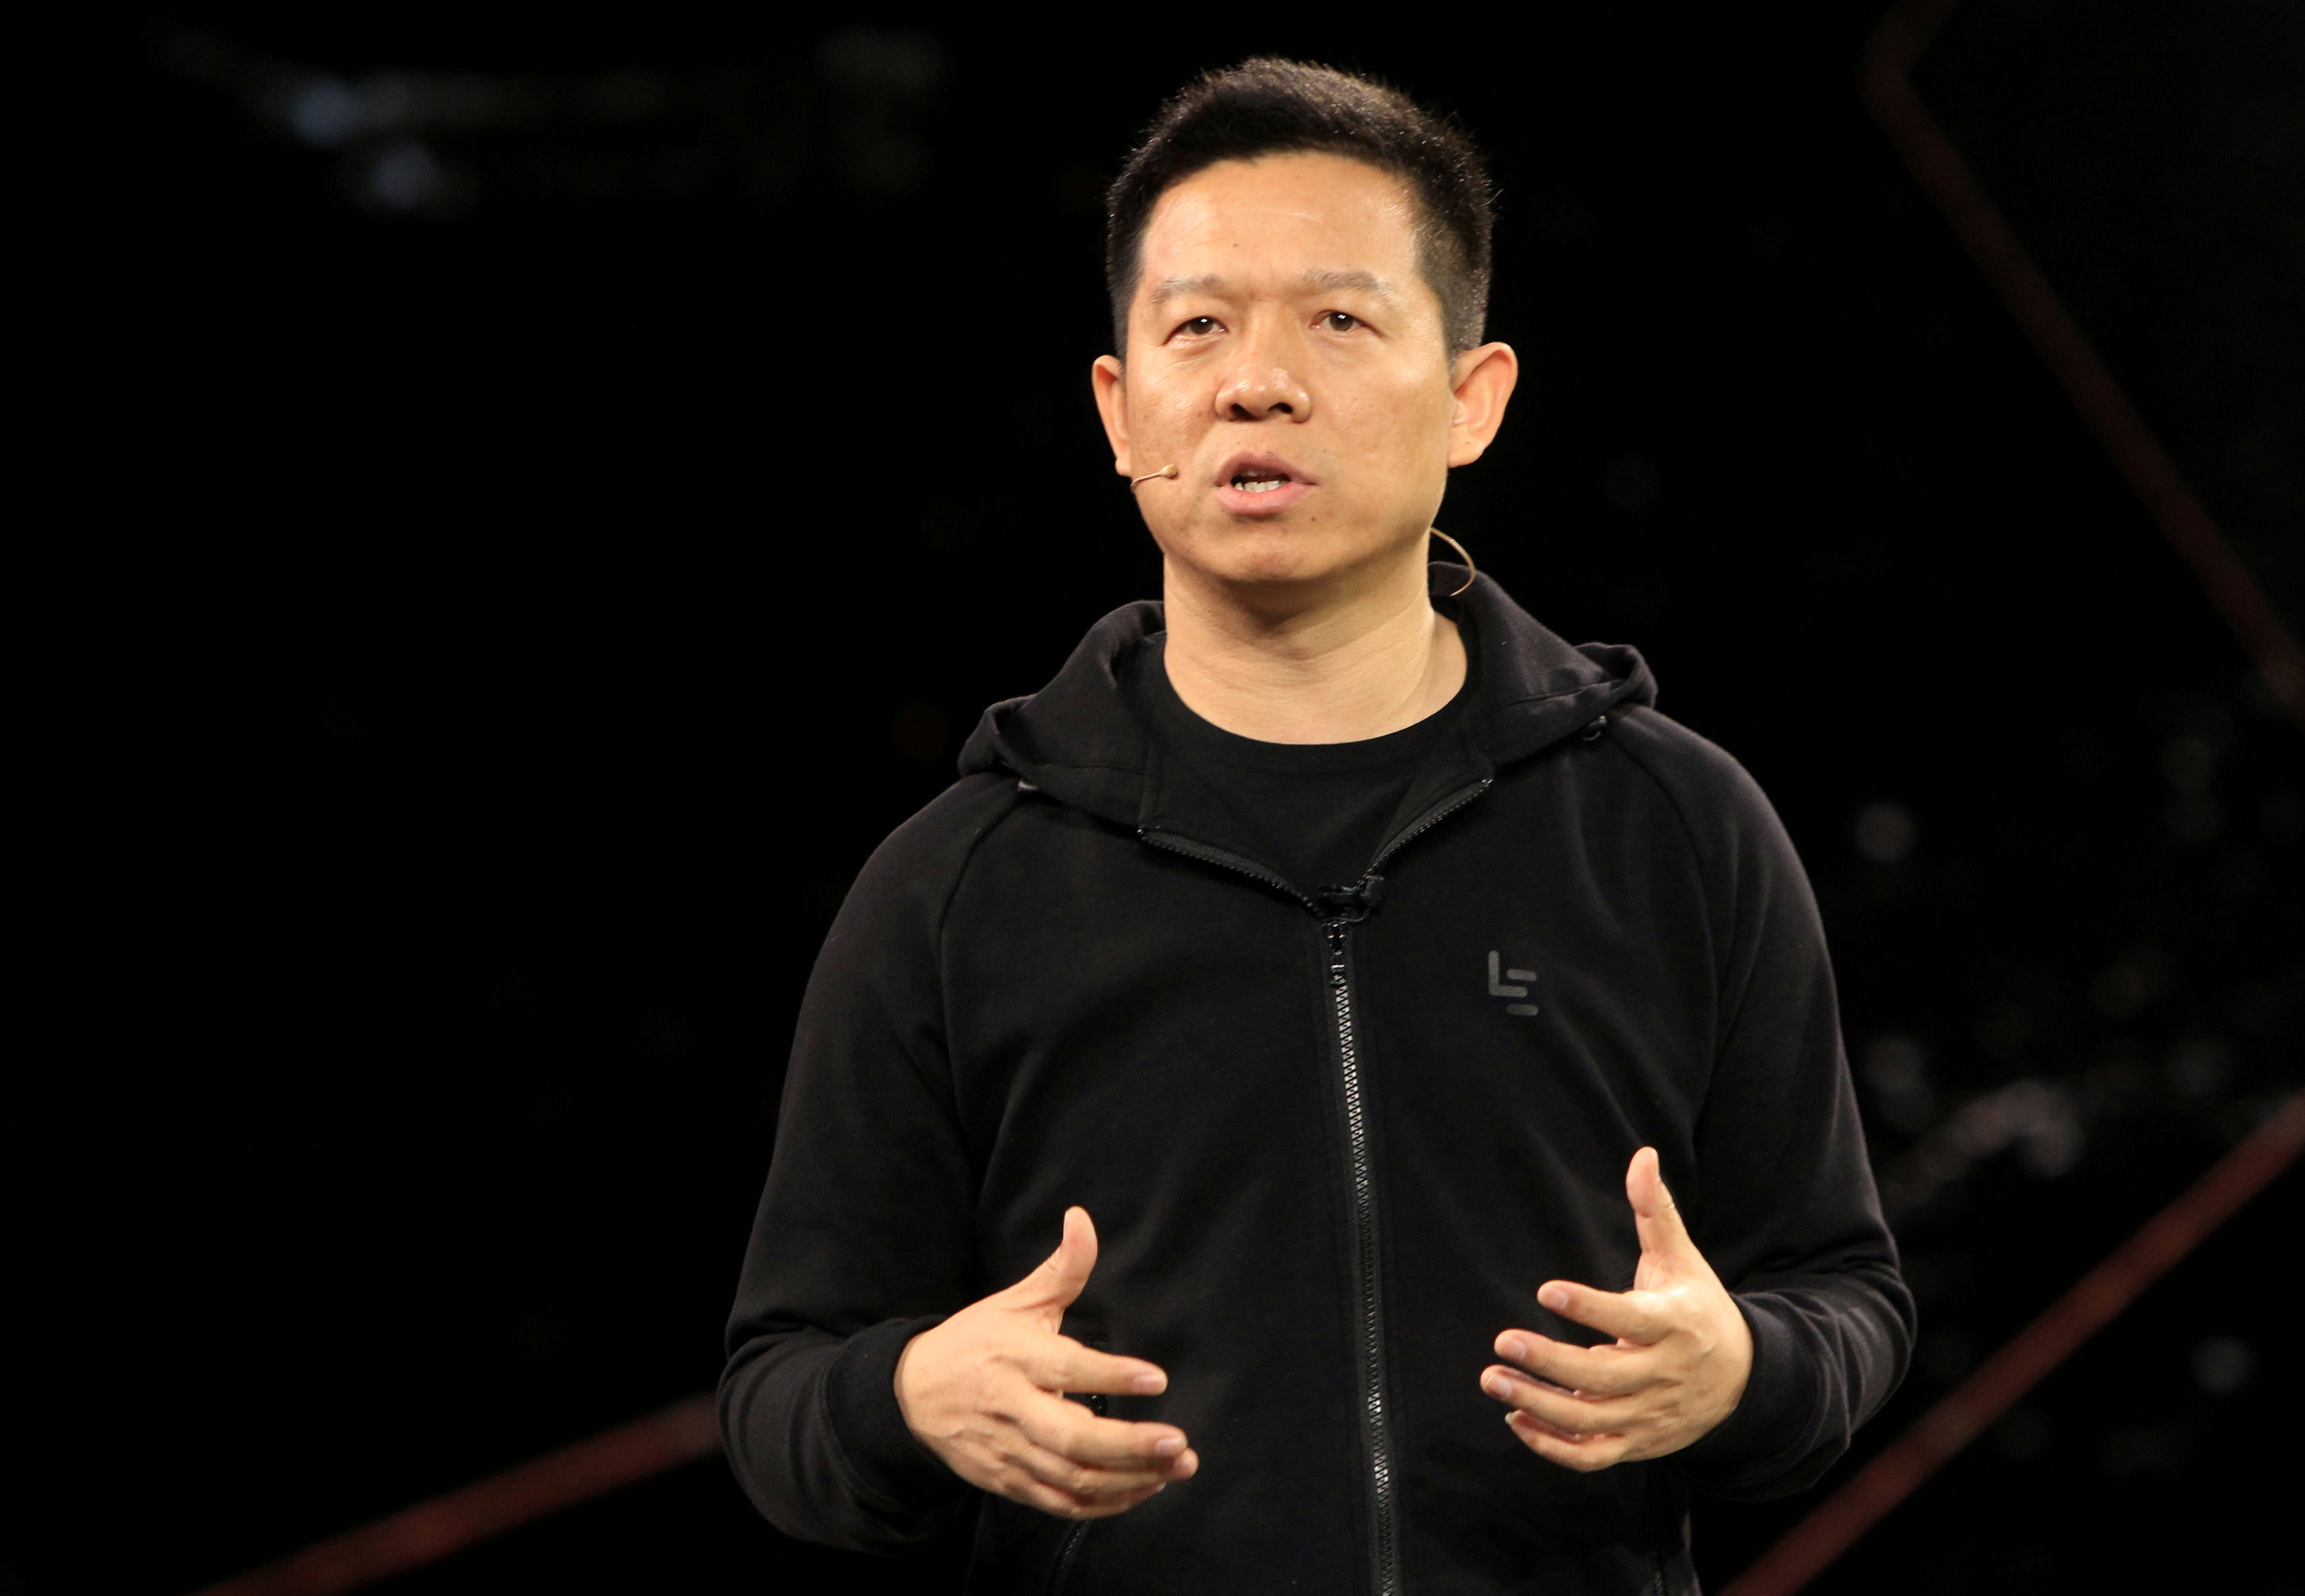 Jia Yueting, founder of LeEco, has seen his hopes for the company shattered by mounting debt and cash flow problems. Photo: Reuters